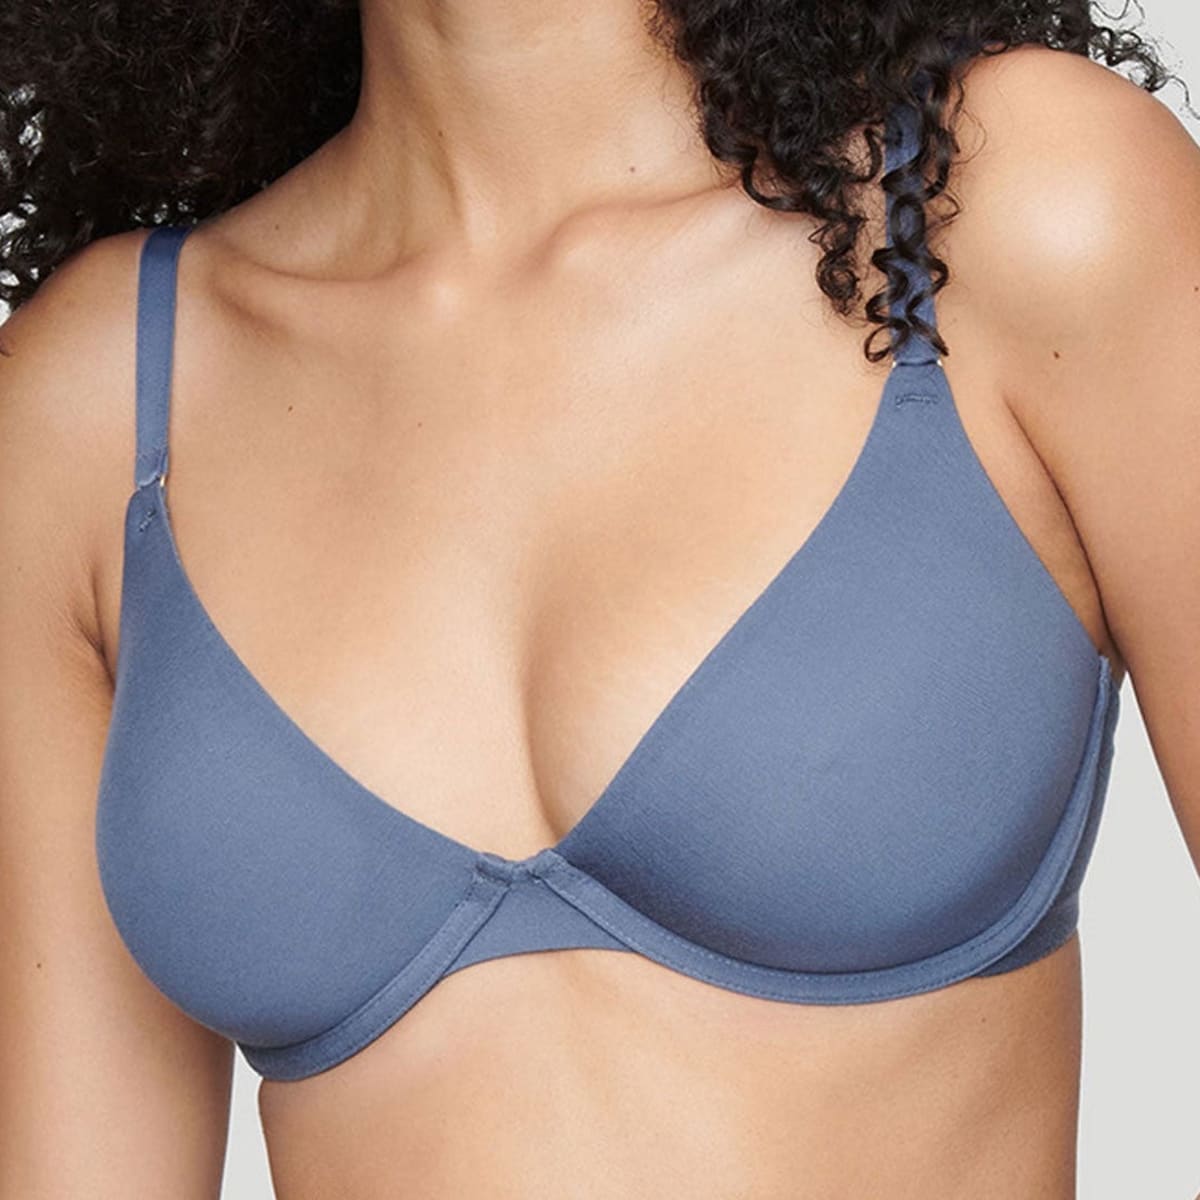 FullBeauty Brands Acquires Beloved DTC Bra Brand Cuup - Fashionista